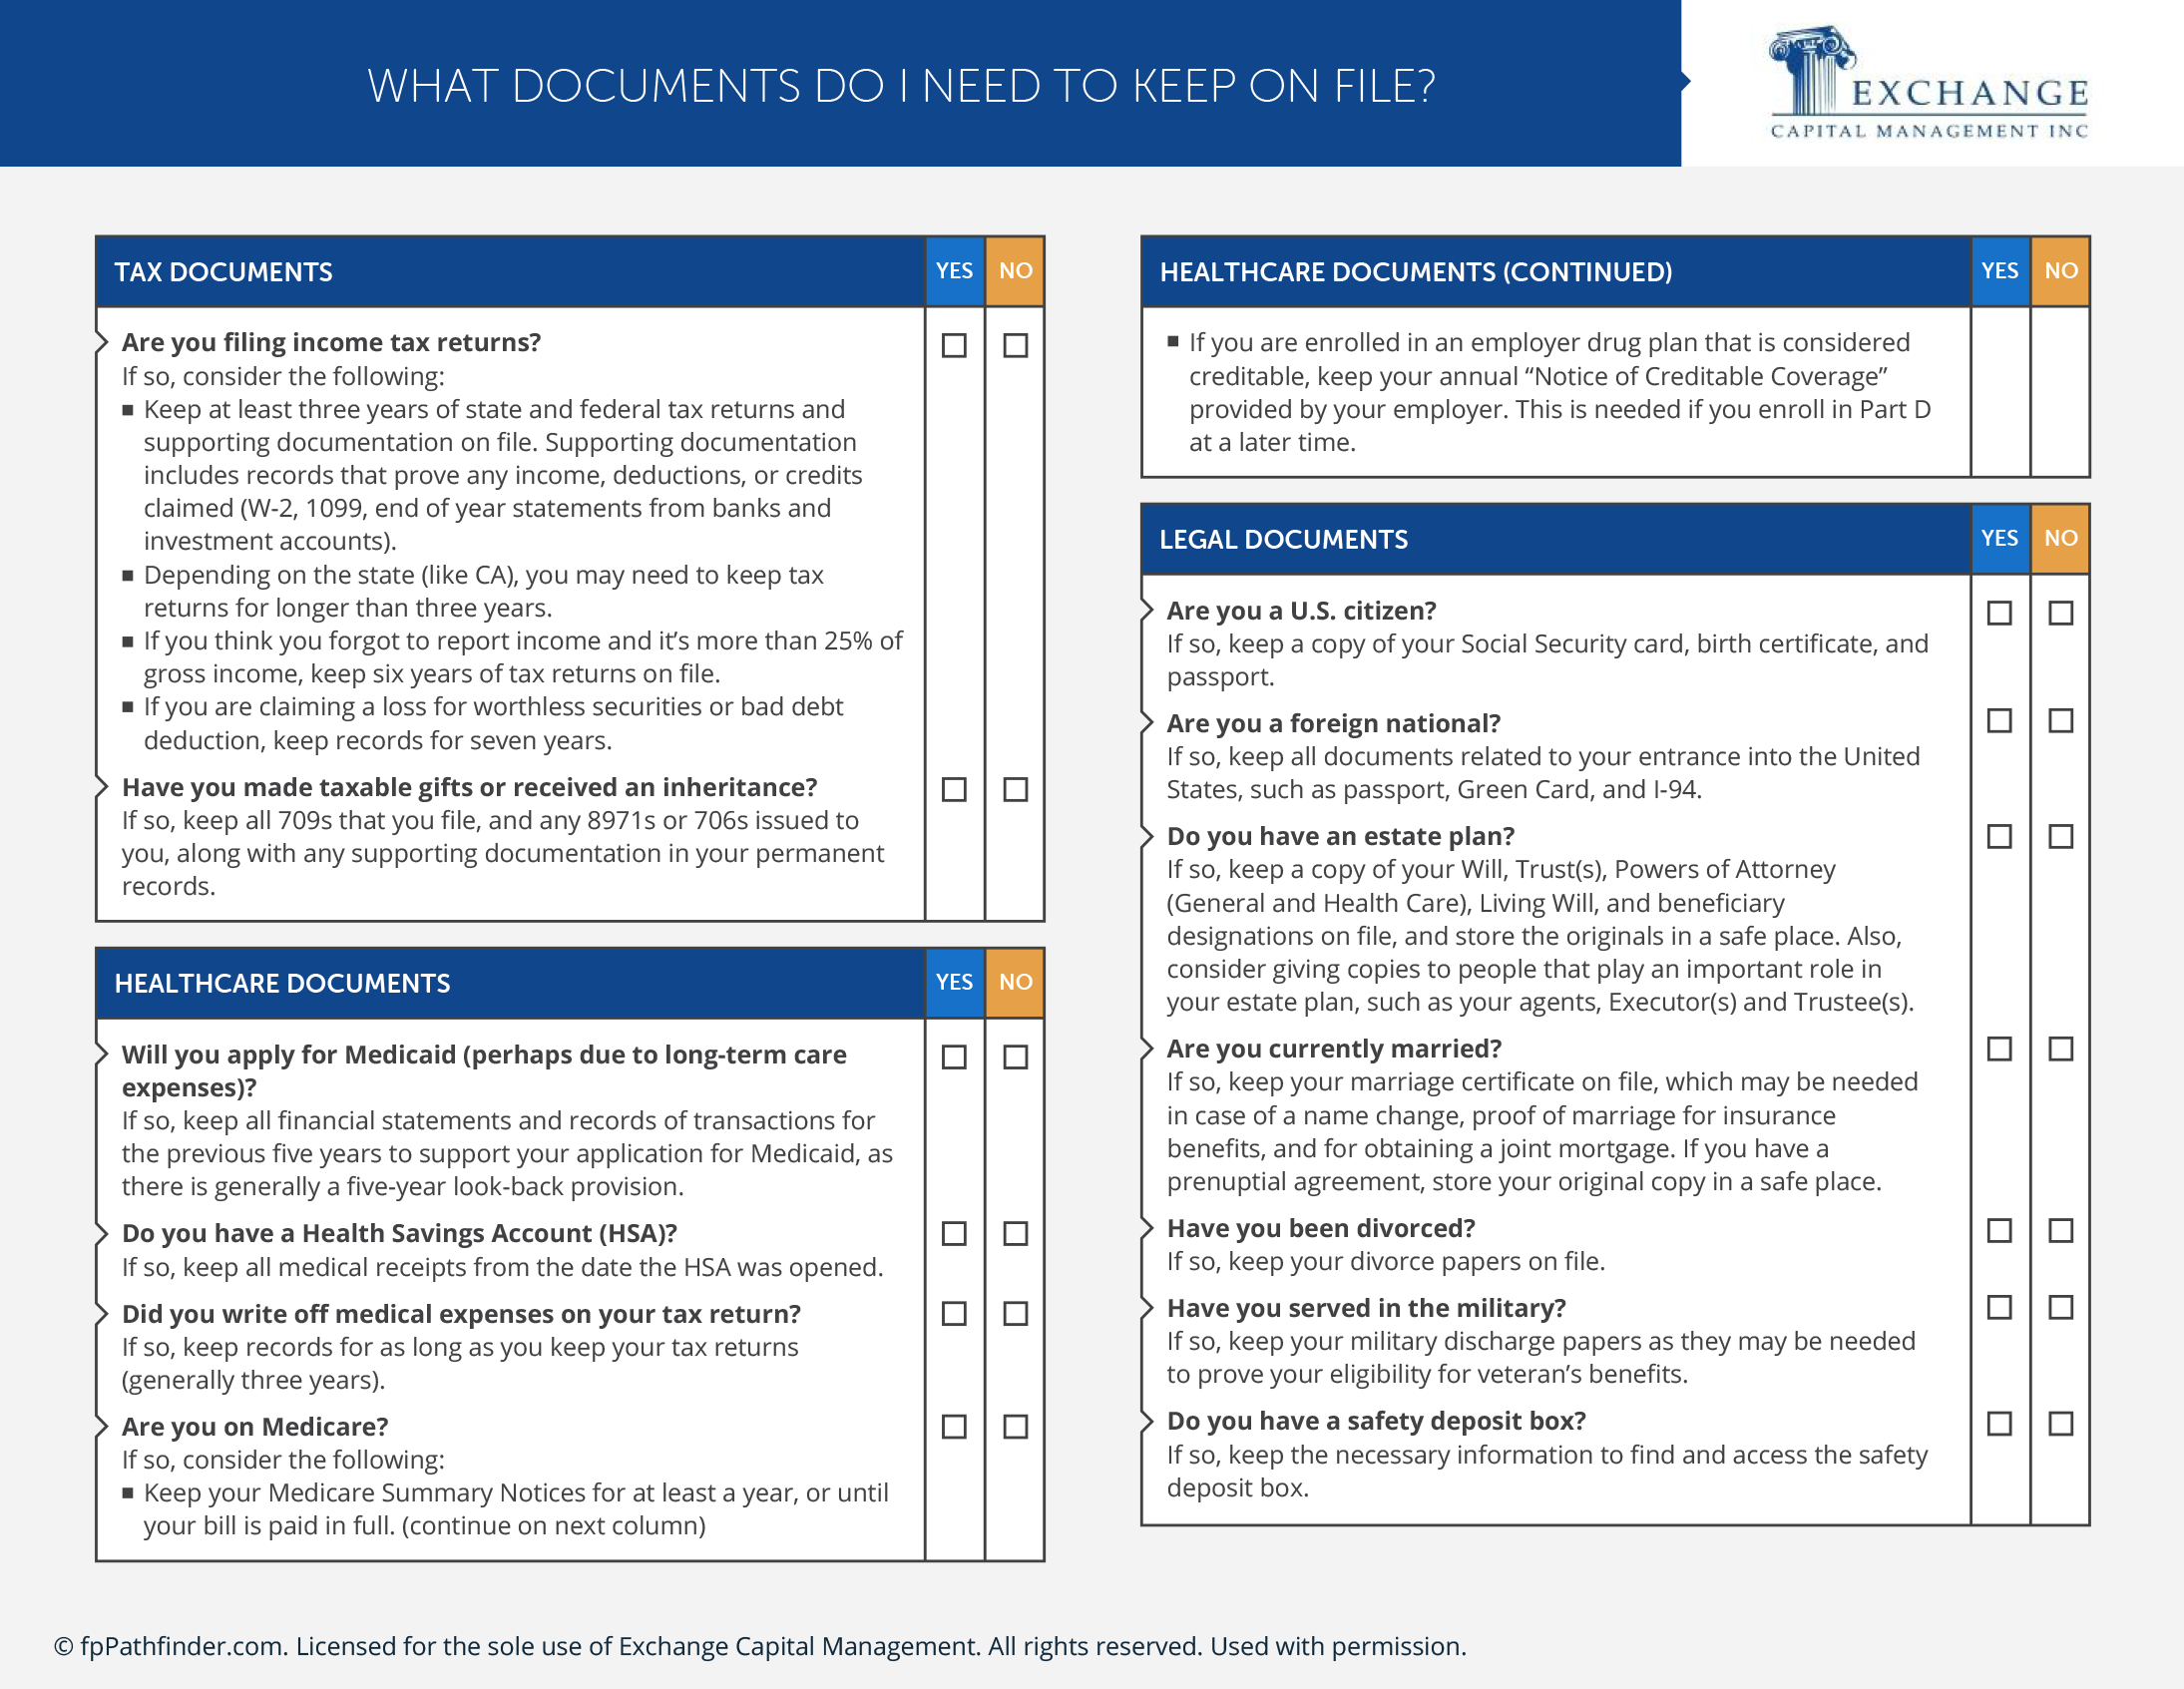 What documents should I keep on file?